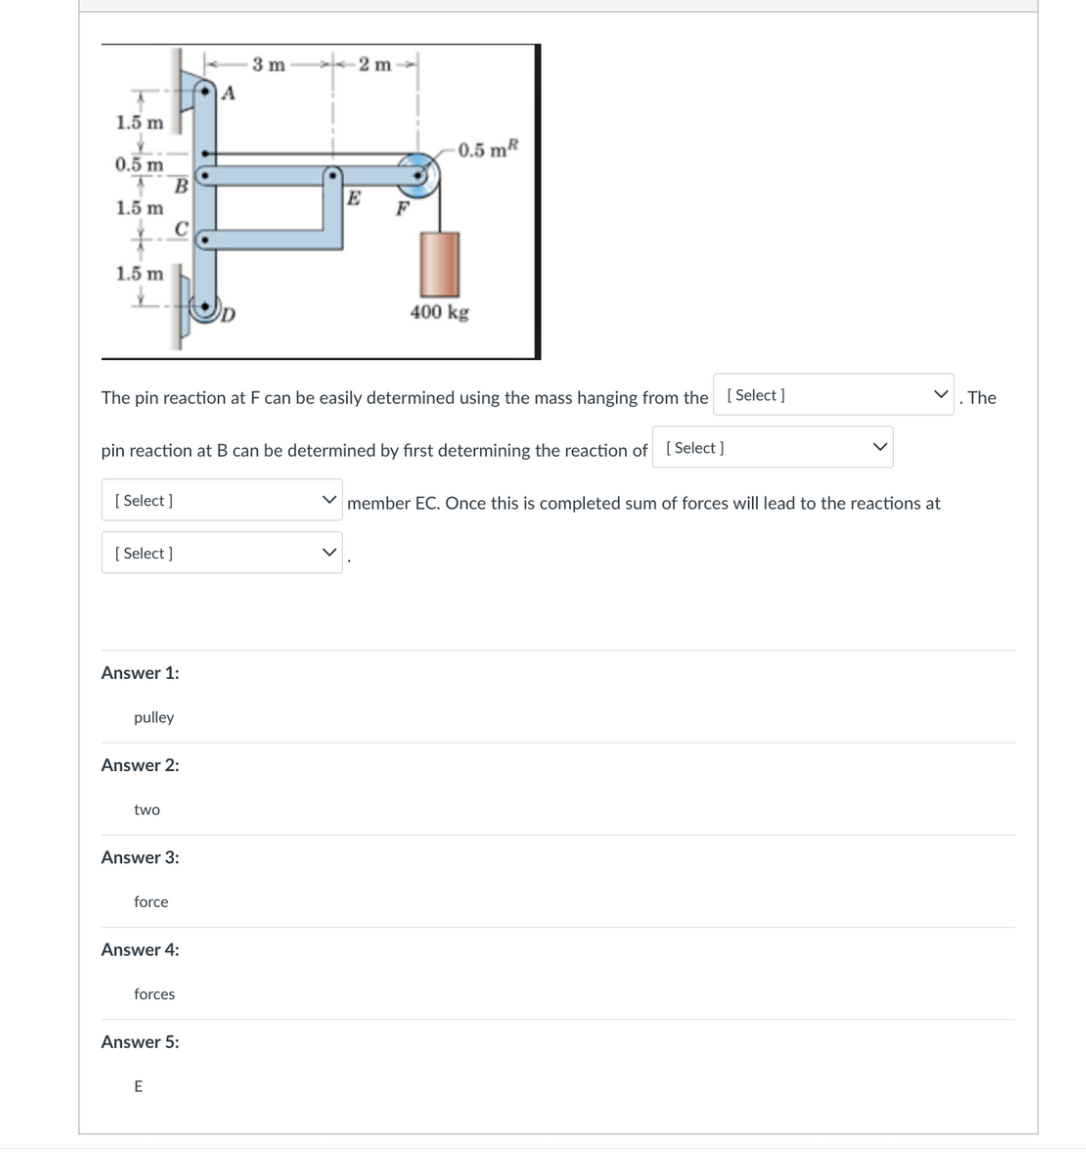 1.5 m
0.5 m
1.5 m
B
1.5 m
B
[Select]
C
[Select]
Answer 1:
pulley
two
Answer 2:
The pin reaction at F can be easily determined using the mass hanging from the [Select]
pin reaction at B can be determined by first determining the reaction of [Select ]
force
Answer 3:
Answer 4:
E
forces
Answer 5:
A
3m
2 m
E
0.5 mR
400 kg
✓member EC. Once this is completed sum of forces will lead to the reactions at
. The